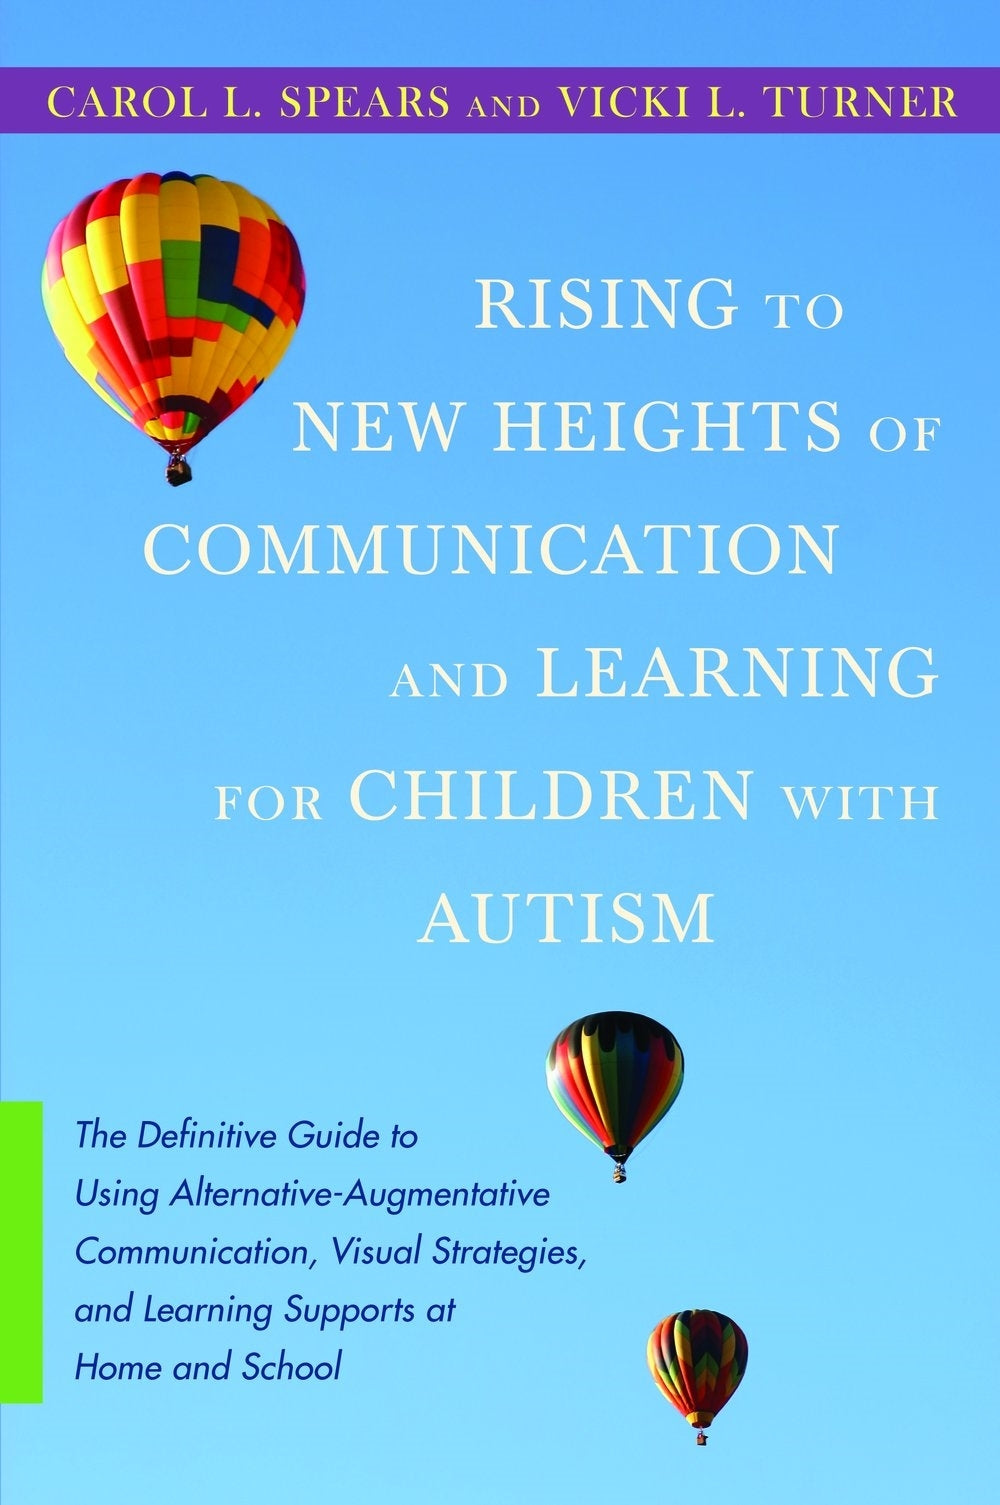 Rising to New Heights of Communication and Learning for Children with Autism by Carol Spears, Vicki Turner